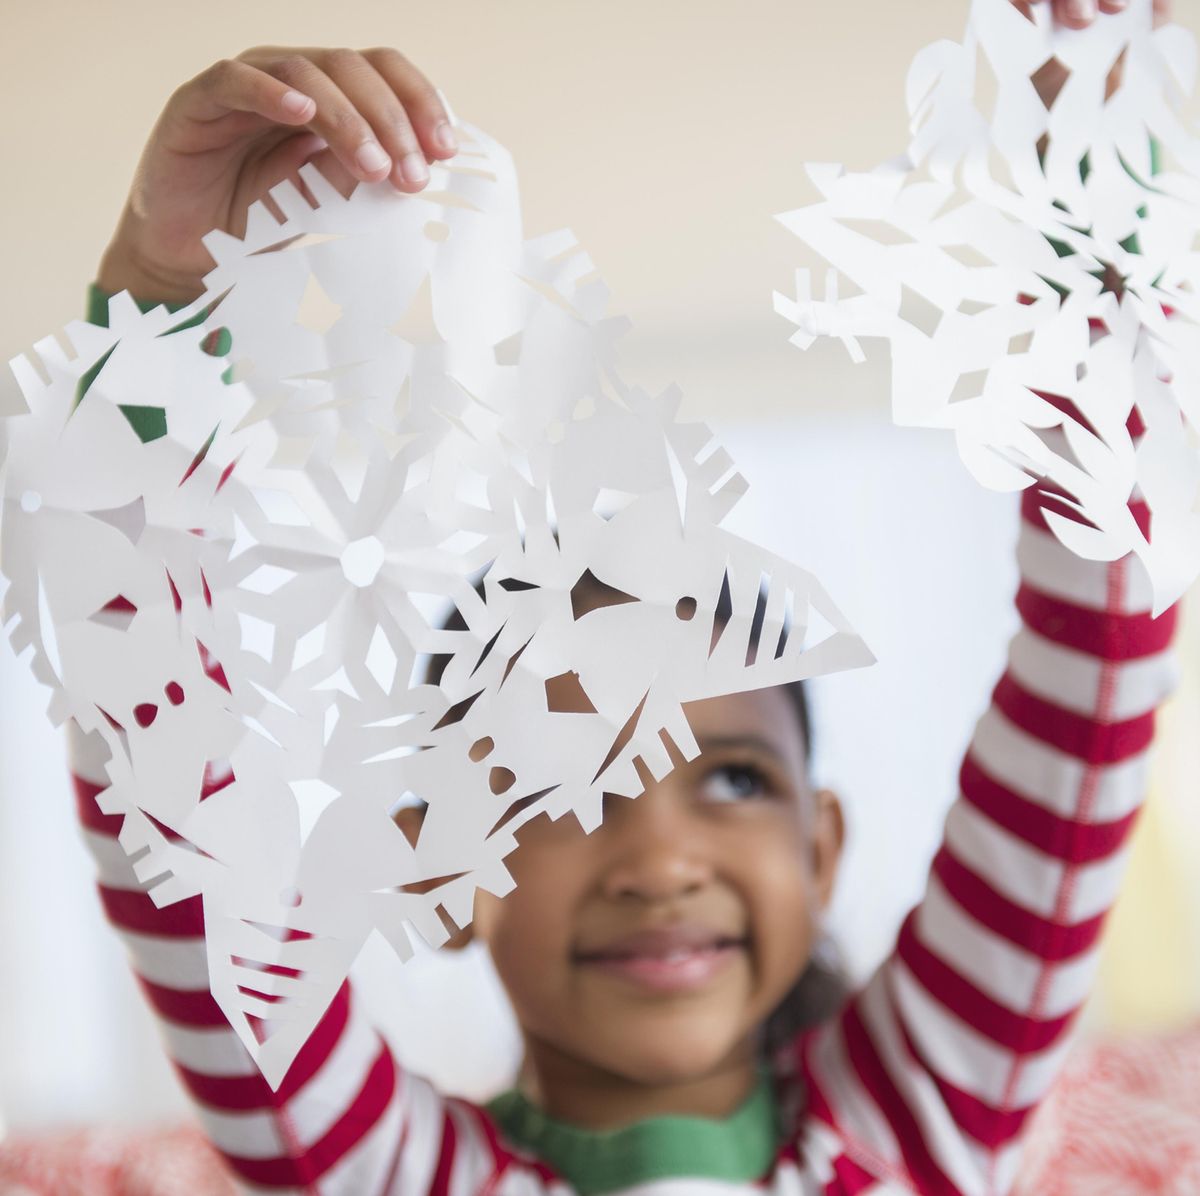 Paper Snowflakes 101: How to Cut Paper Snowflakes